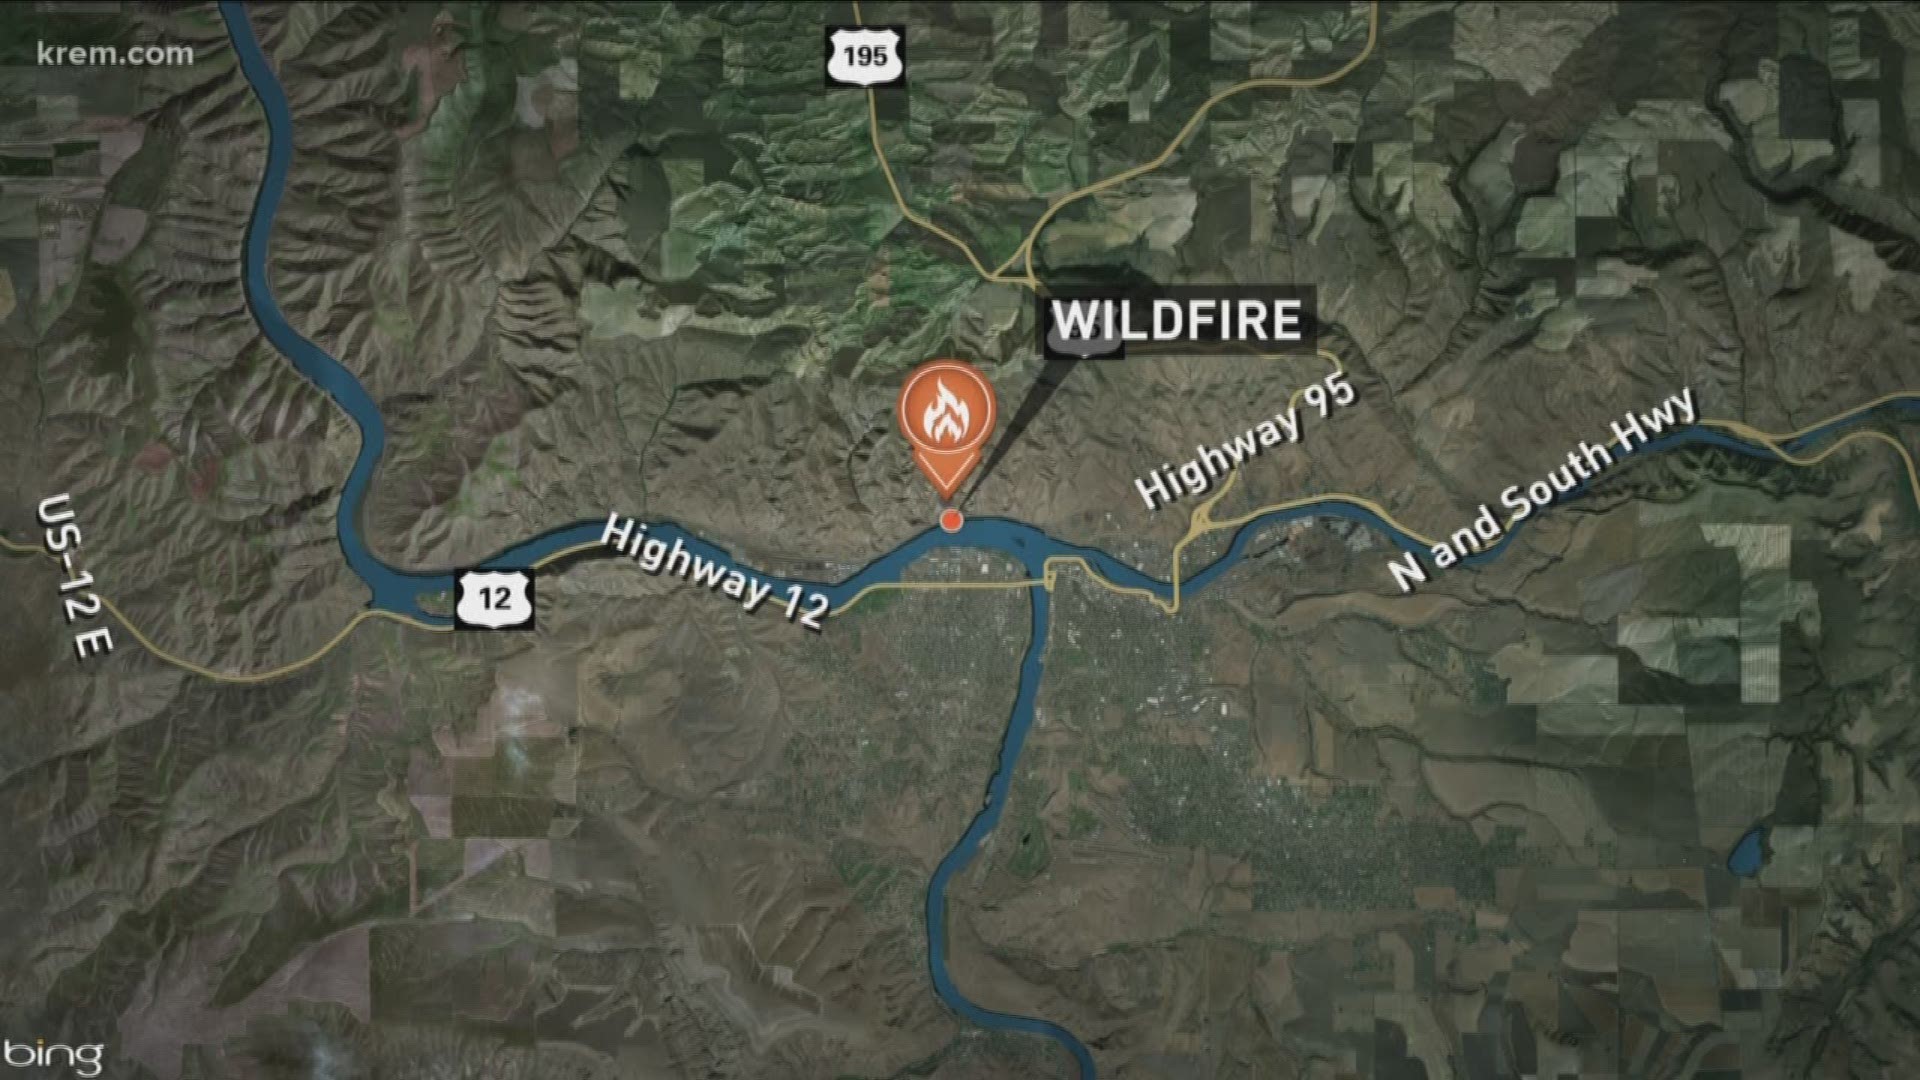 Officials said the fire is close to the Nisqually John Landing, south of Pullman.